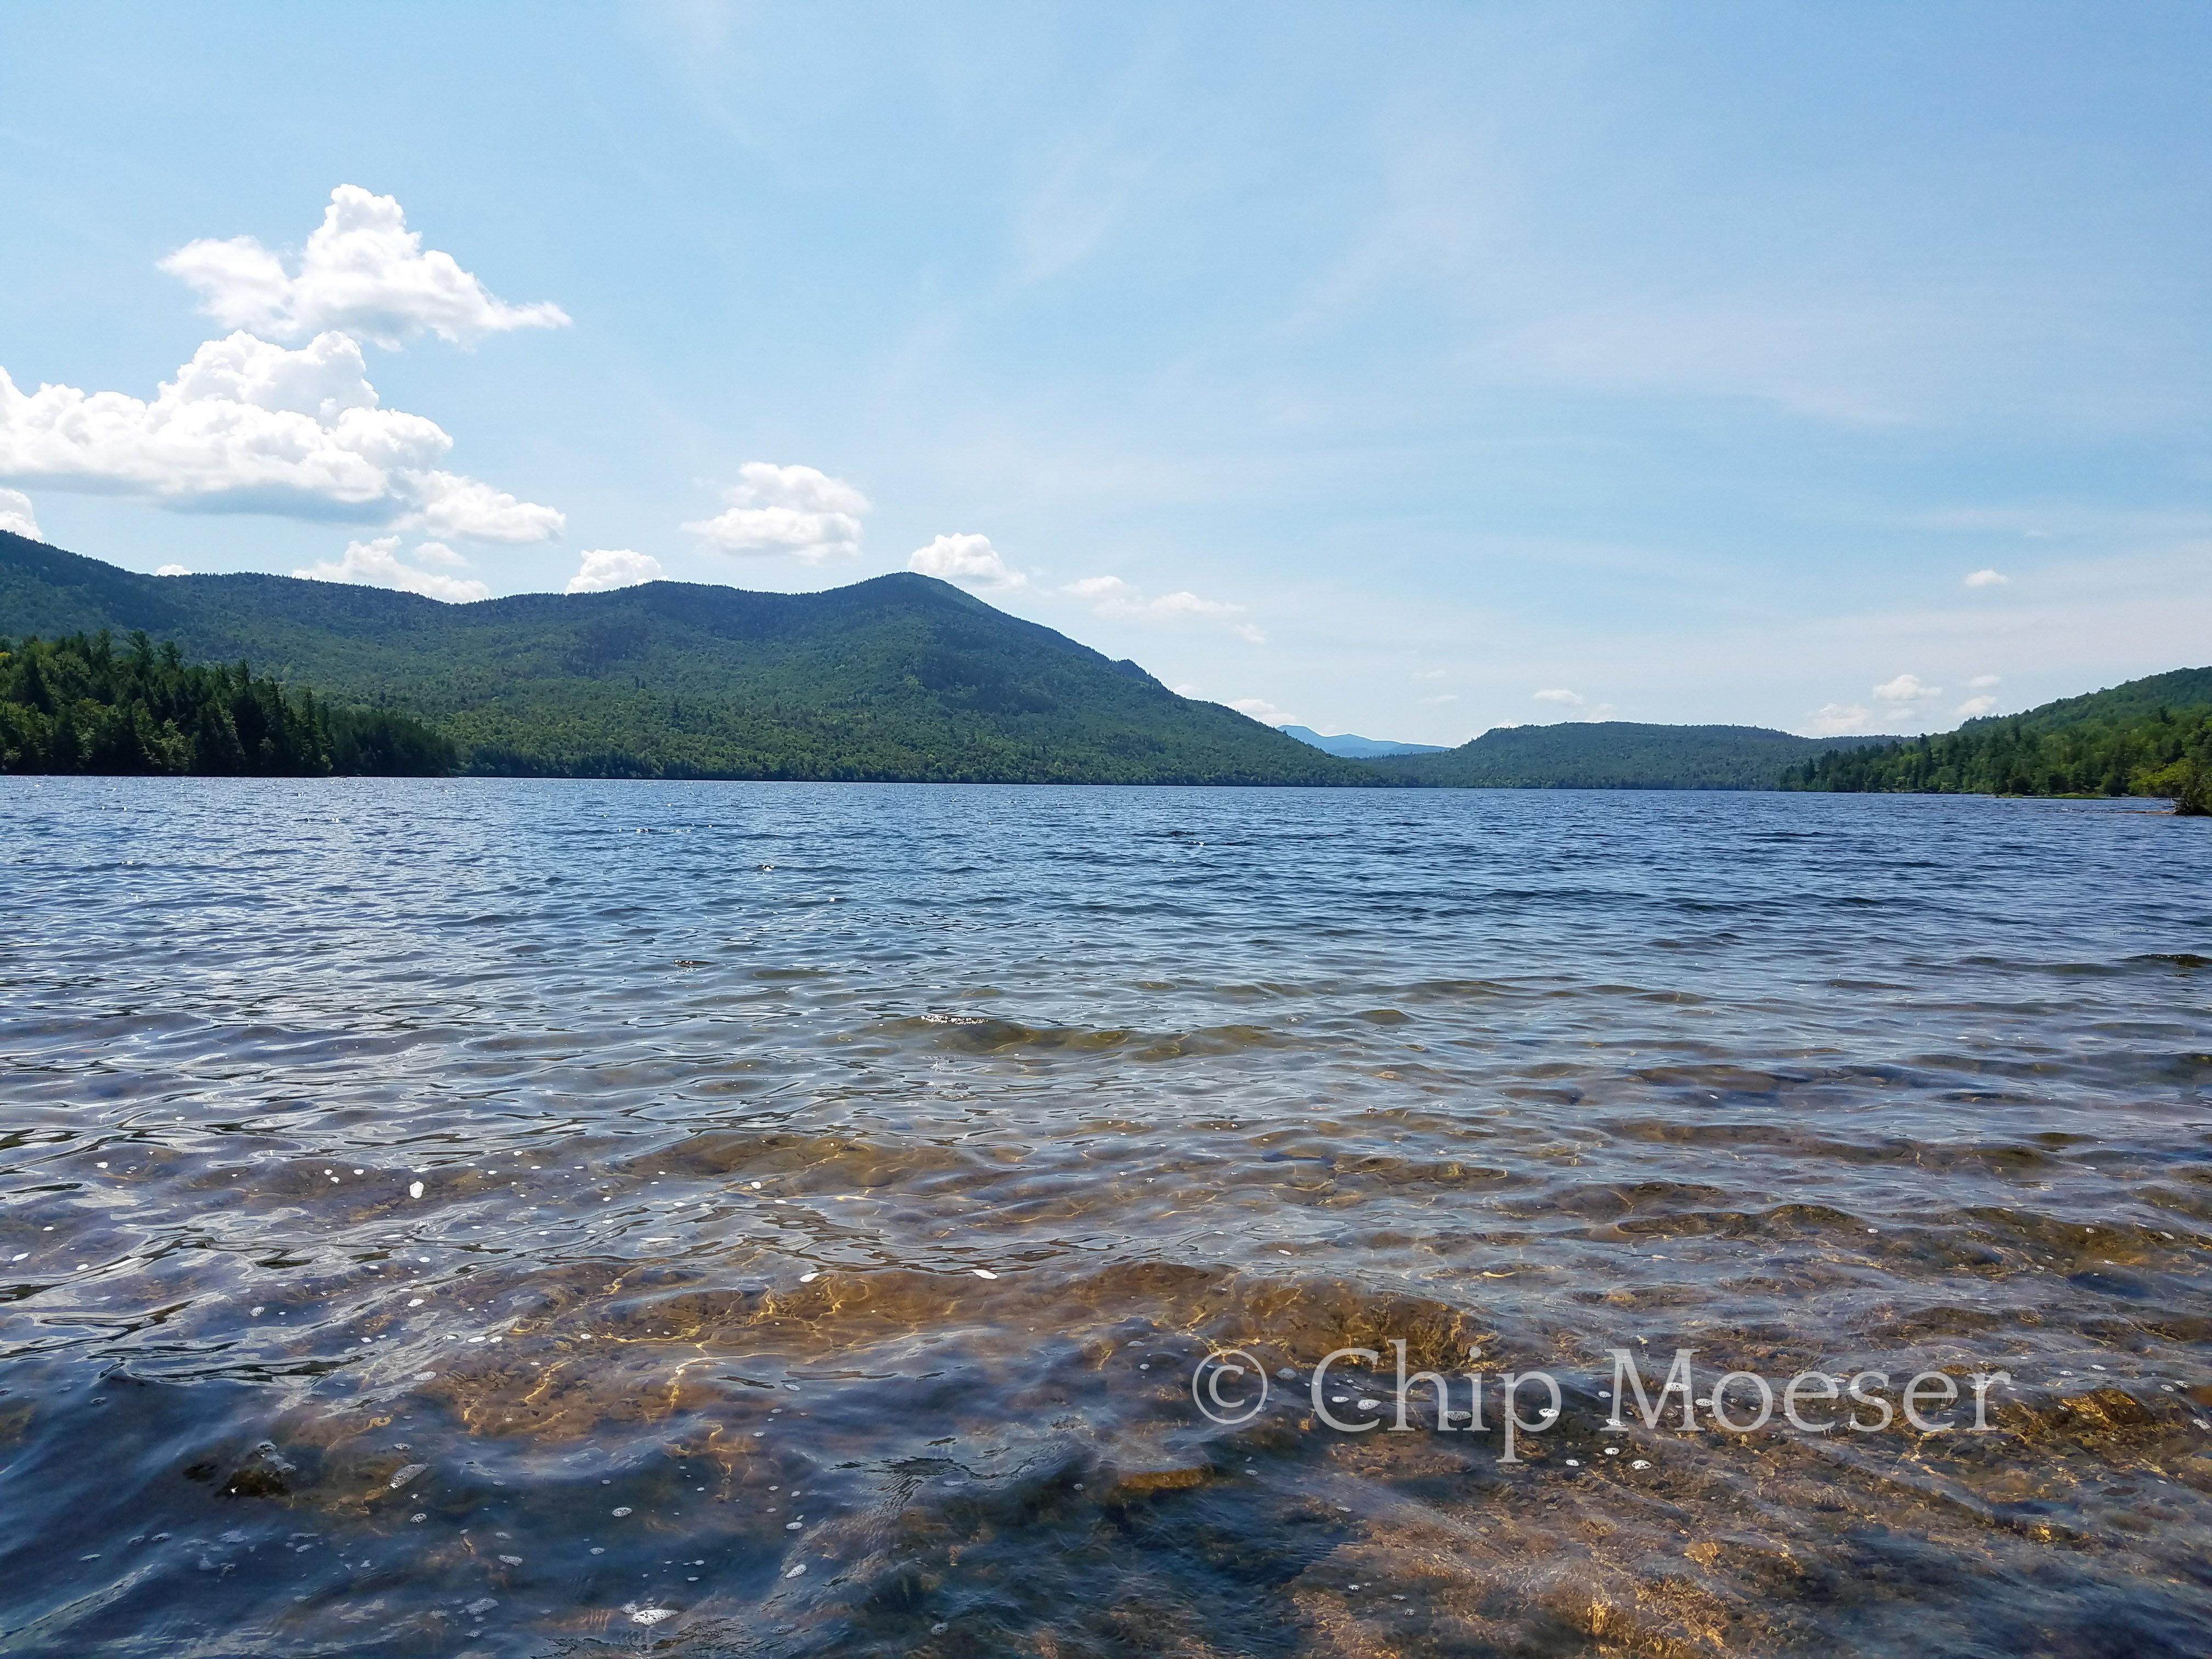 North east shore of Taylor Pond with Catamount Mountain and the High Peaks visible in the distance.